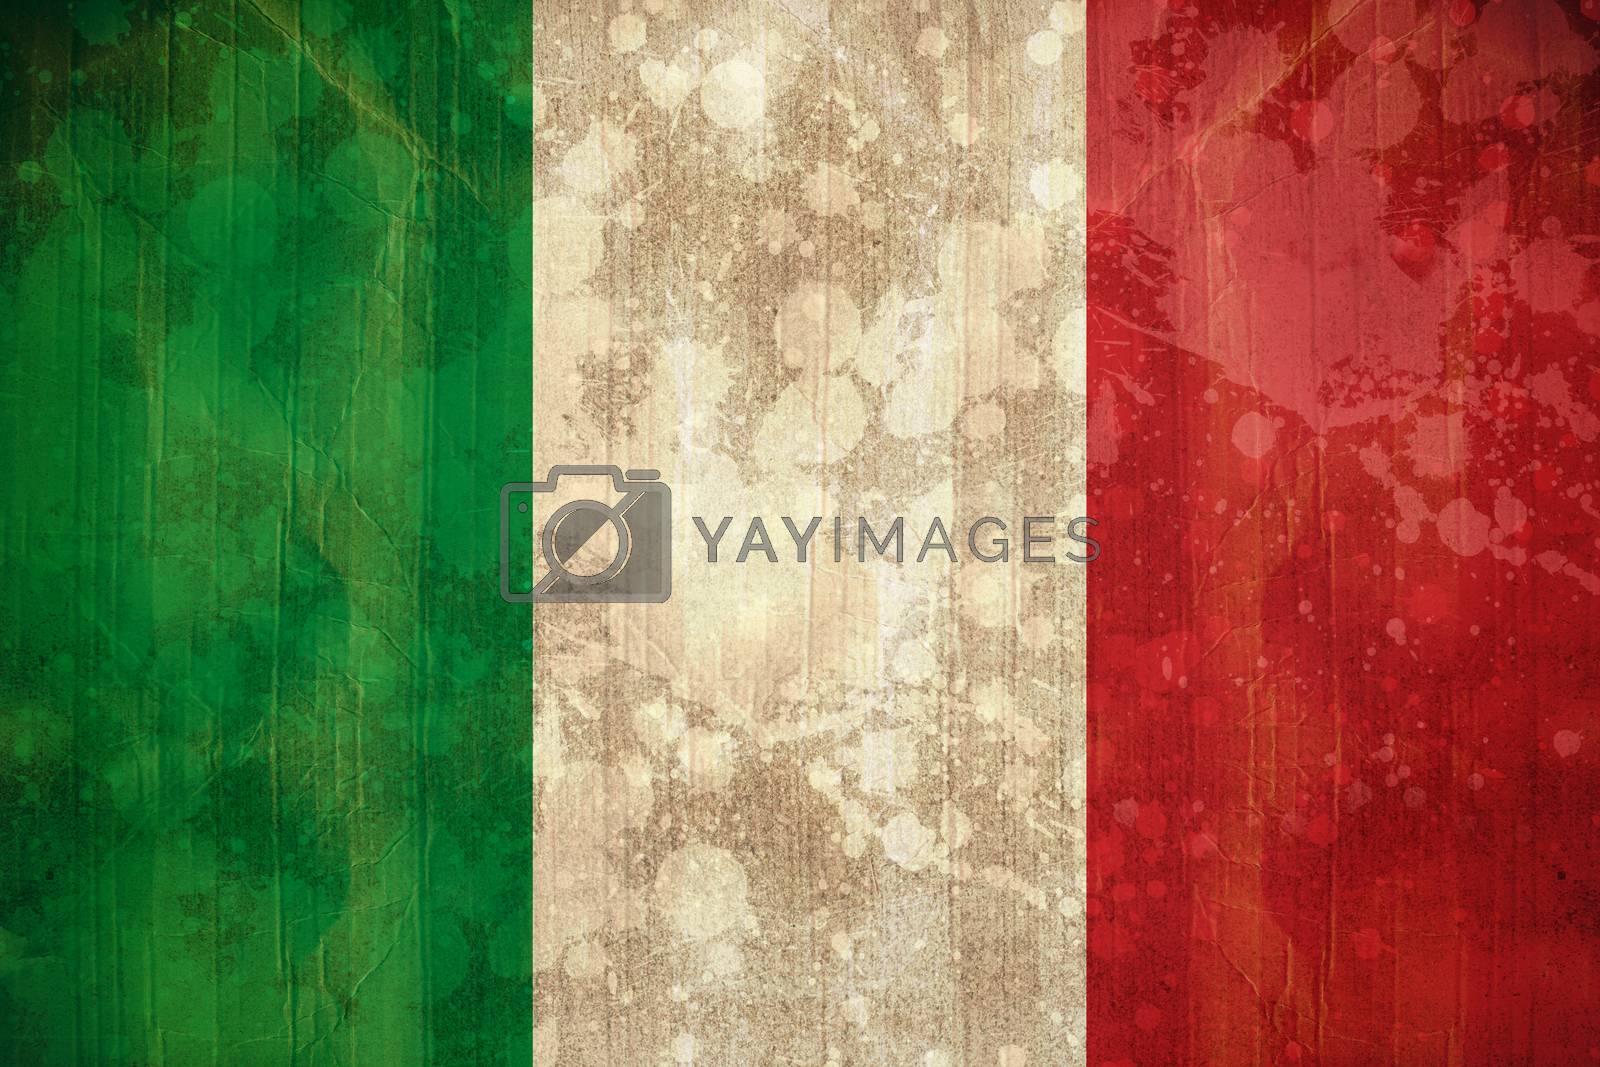 Royalty free image of Italy flag in grunge effect by Wavebreakmedia